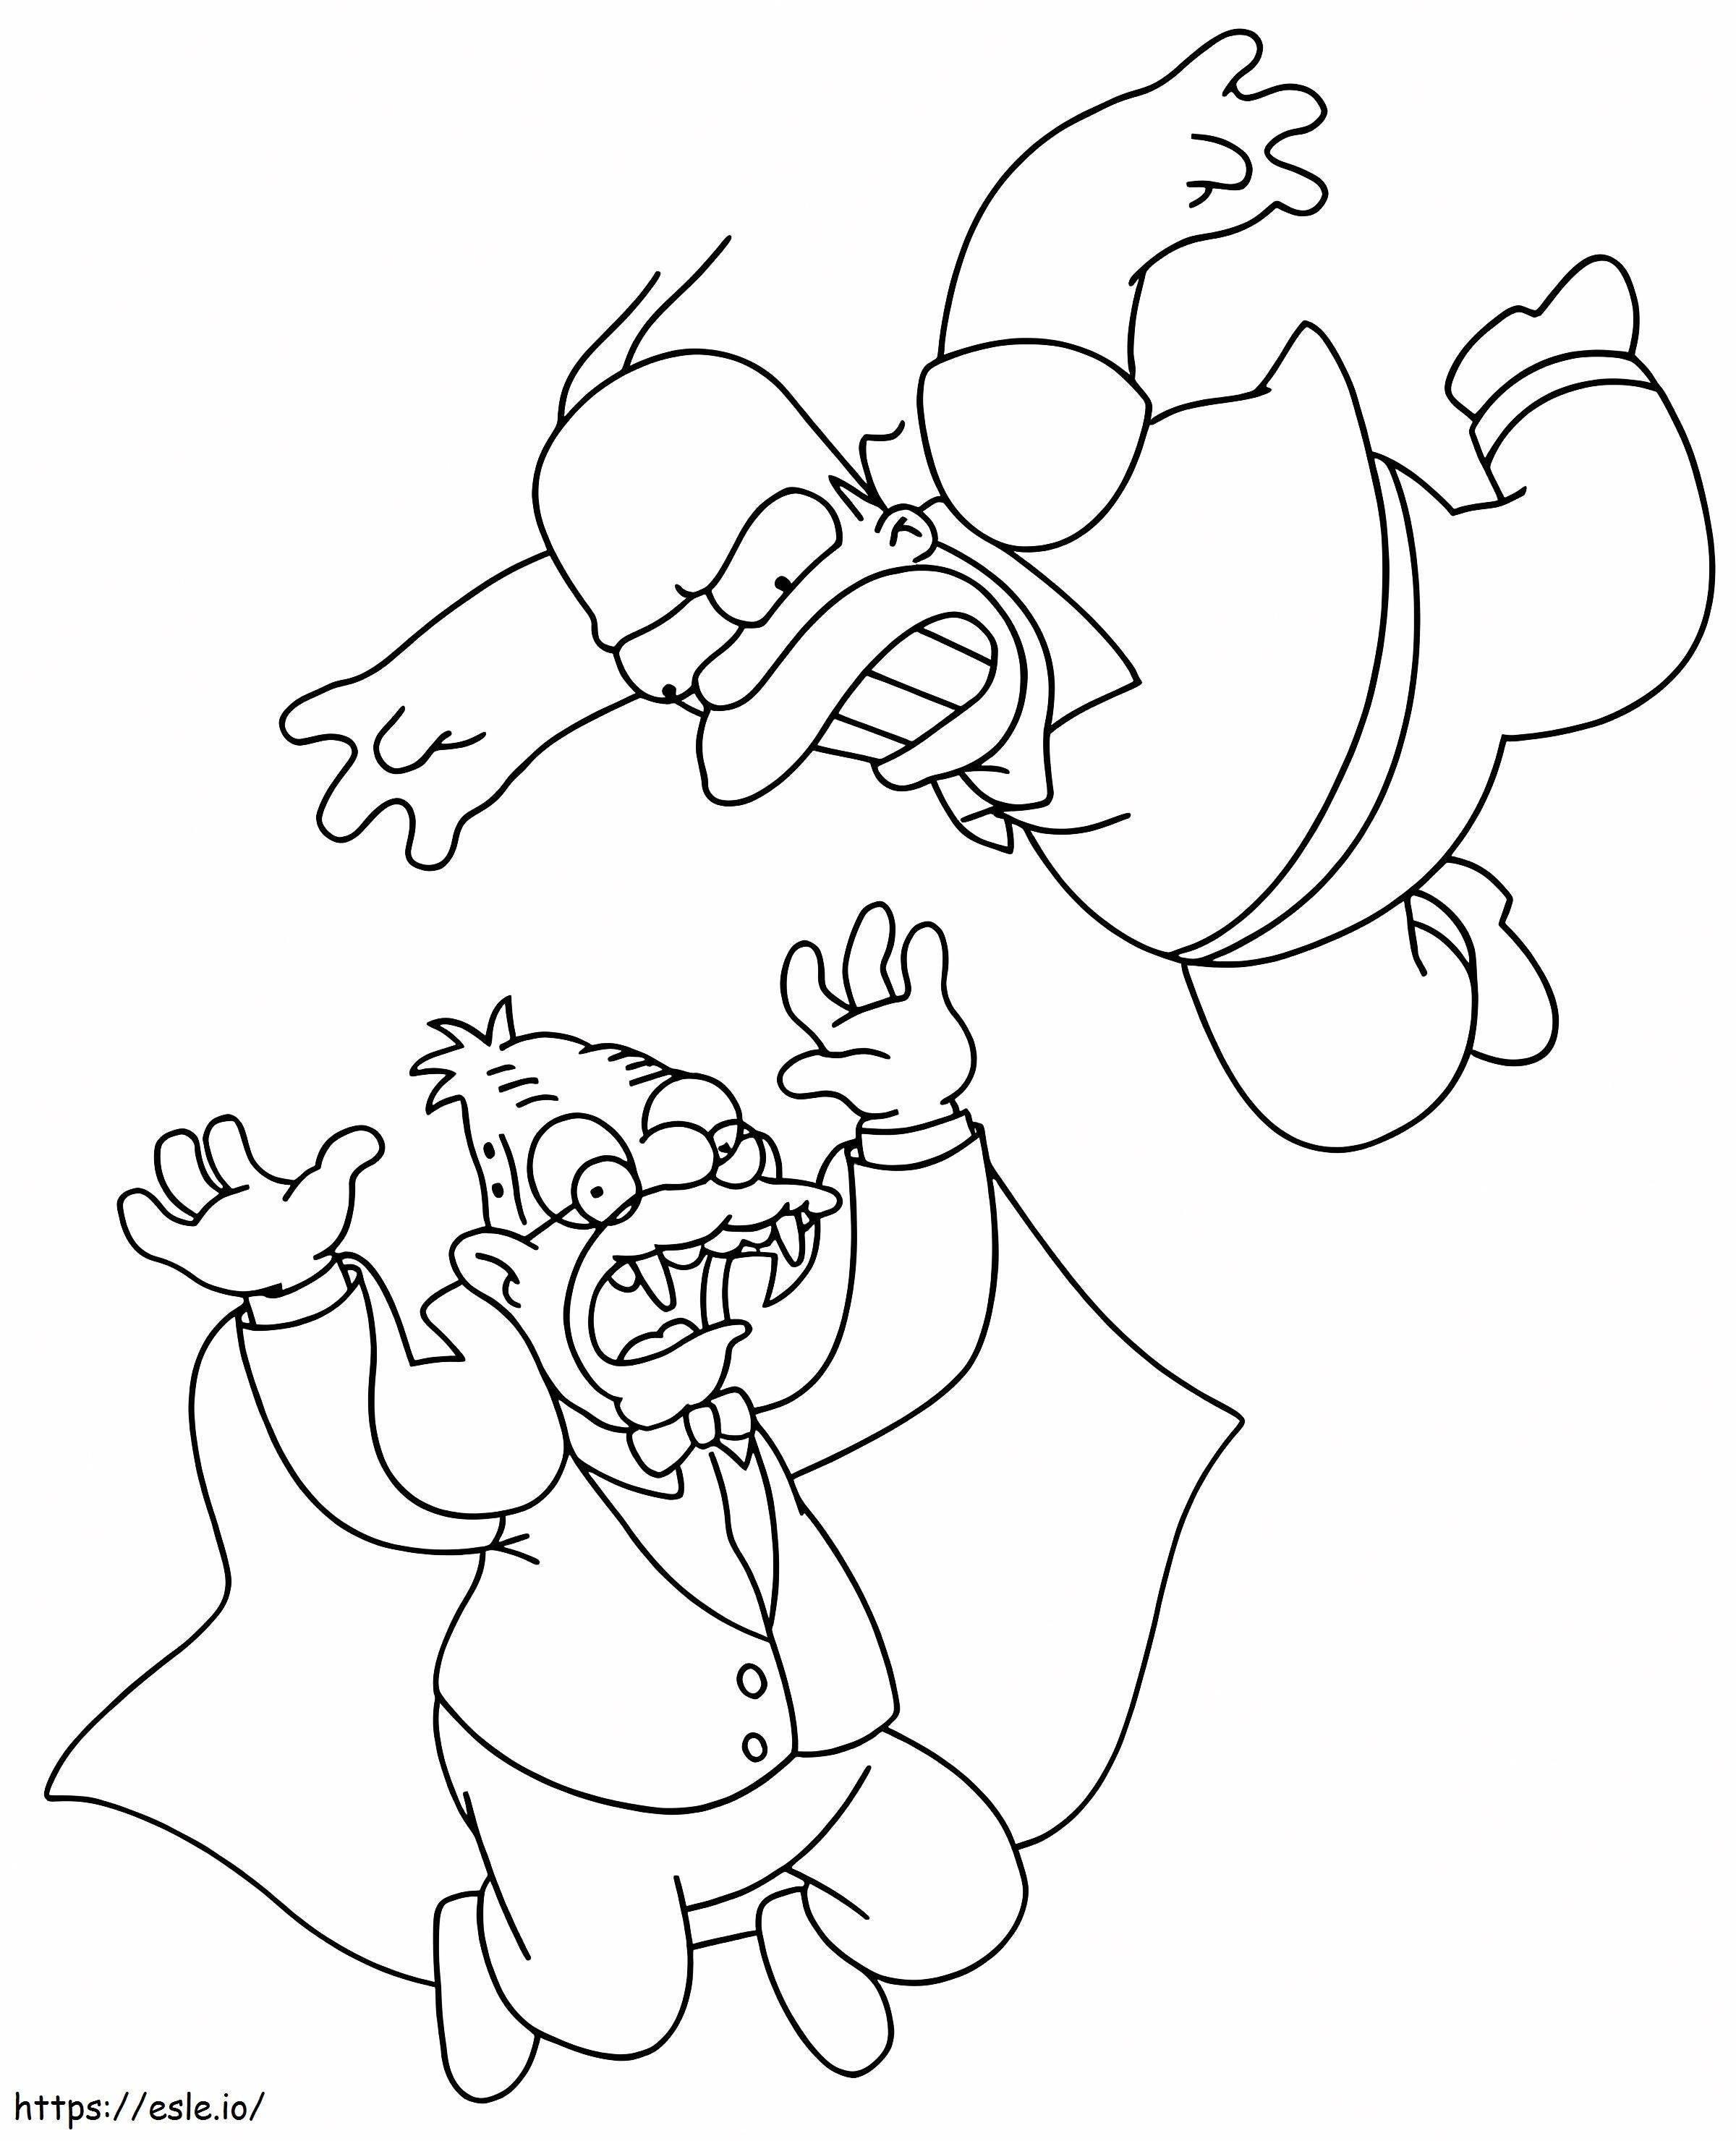 Homer Simpson Attack coloring page